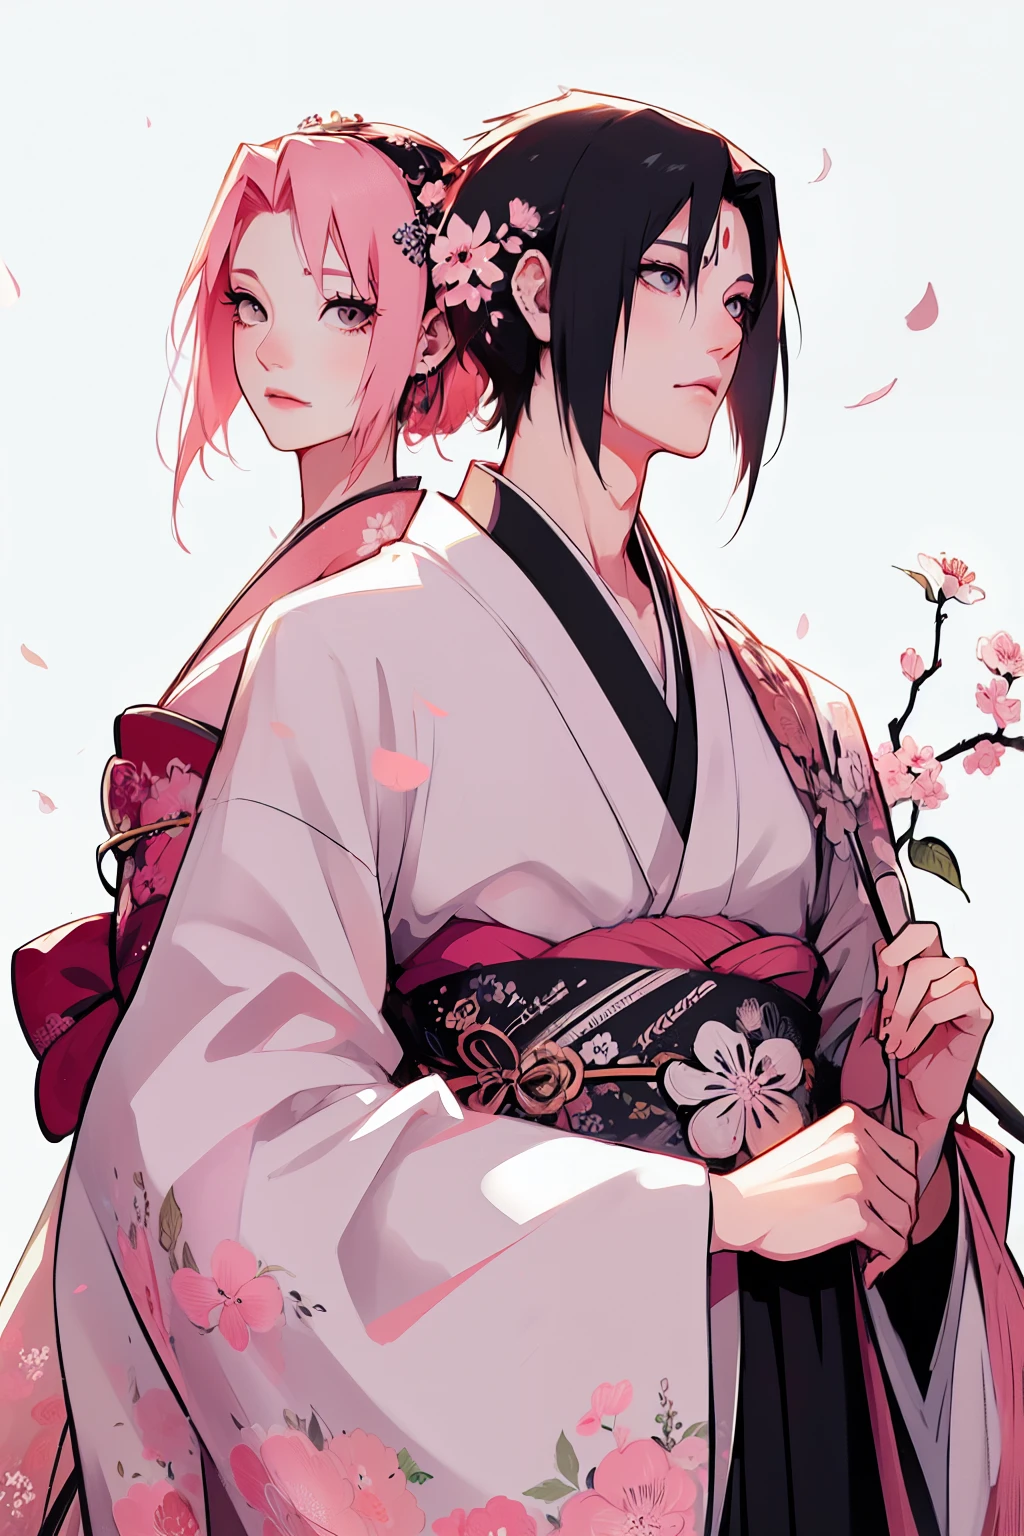 Sasusaku. Sasuke, the tall, handsome man with chiseled features, piercing black eyes, and black hair. He's wearing a kimono, he's a prince. The woman is sakura, equally stunning with soft features and delicate features, her hair is short and pink that falls elegantly around her face, adding to her romantic and dreamy appearance. She is wearing a kimono. The couple is in a ceremony at a temple. hands down.